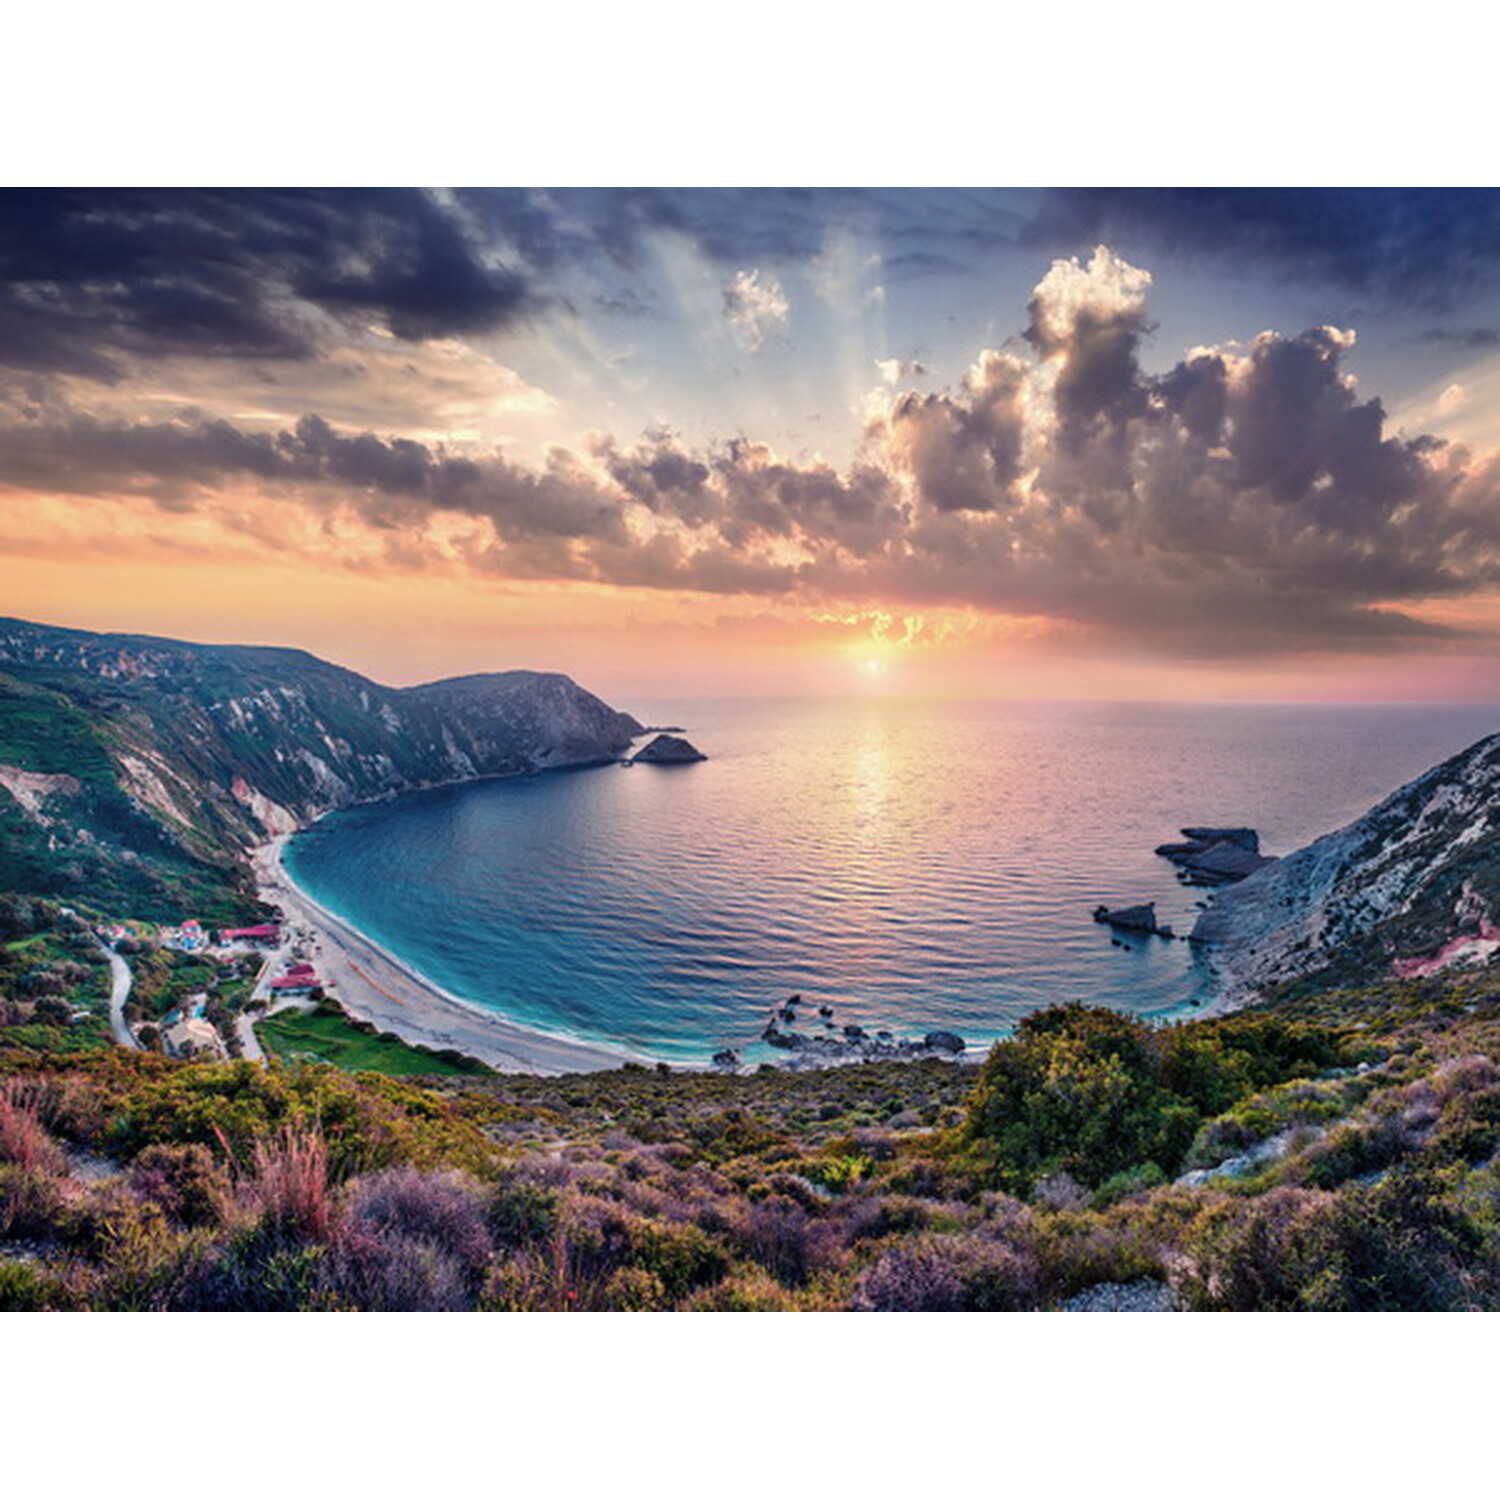 Views Across The Cove Canvas Wall Art Image